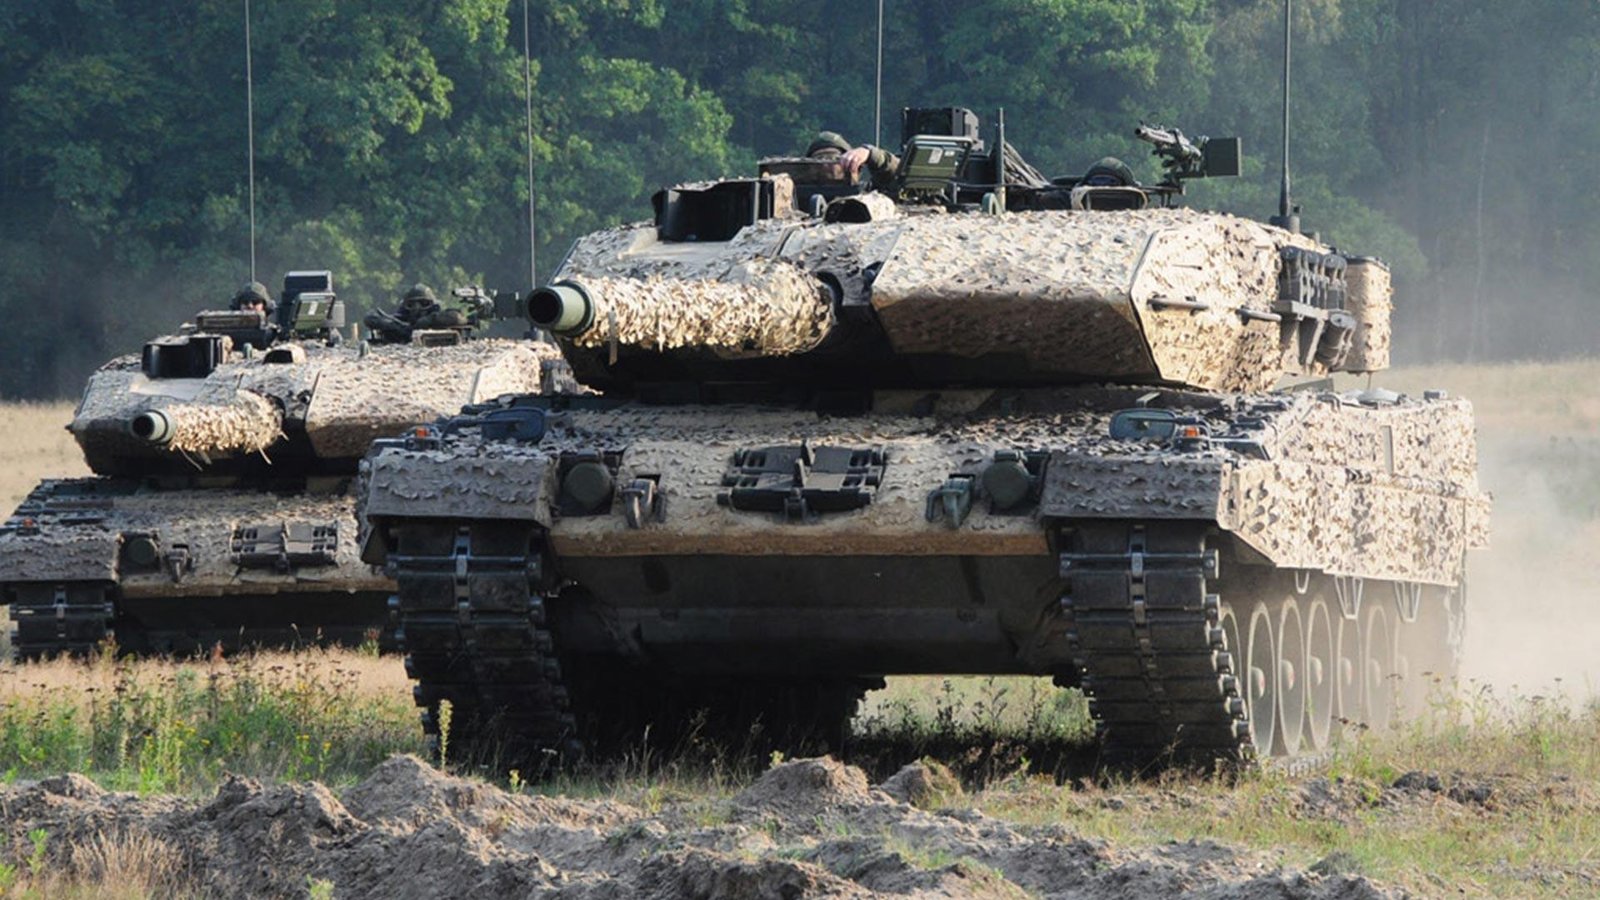 Norway Officially Orders 54 New KMW Leopard 2A7 Tanks